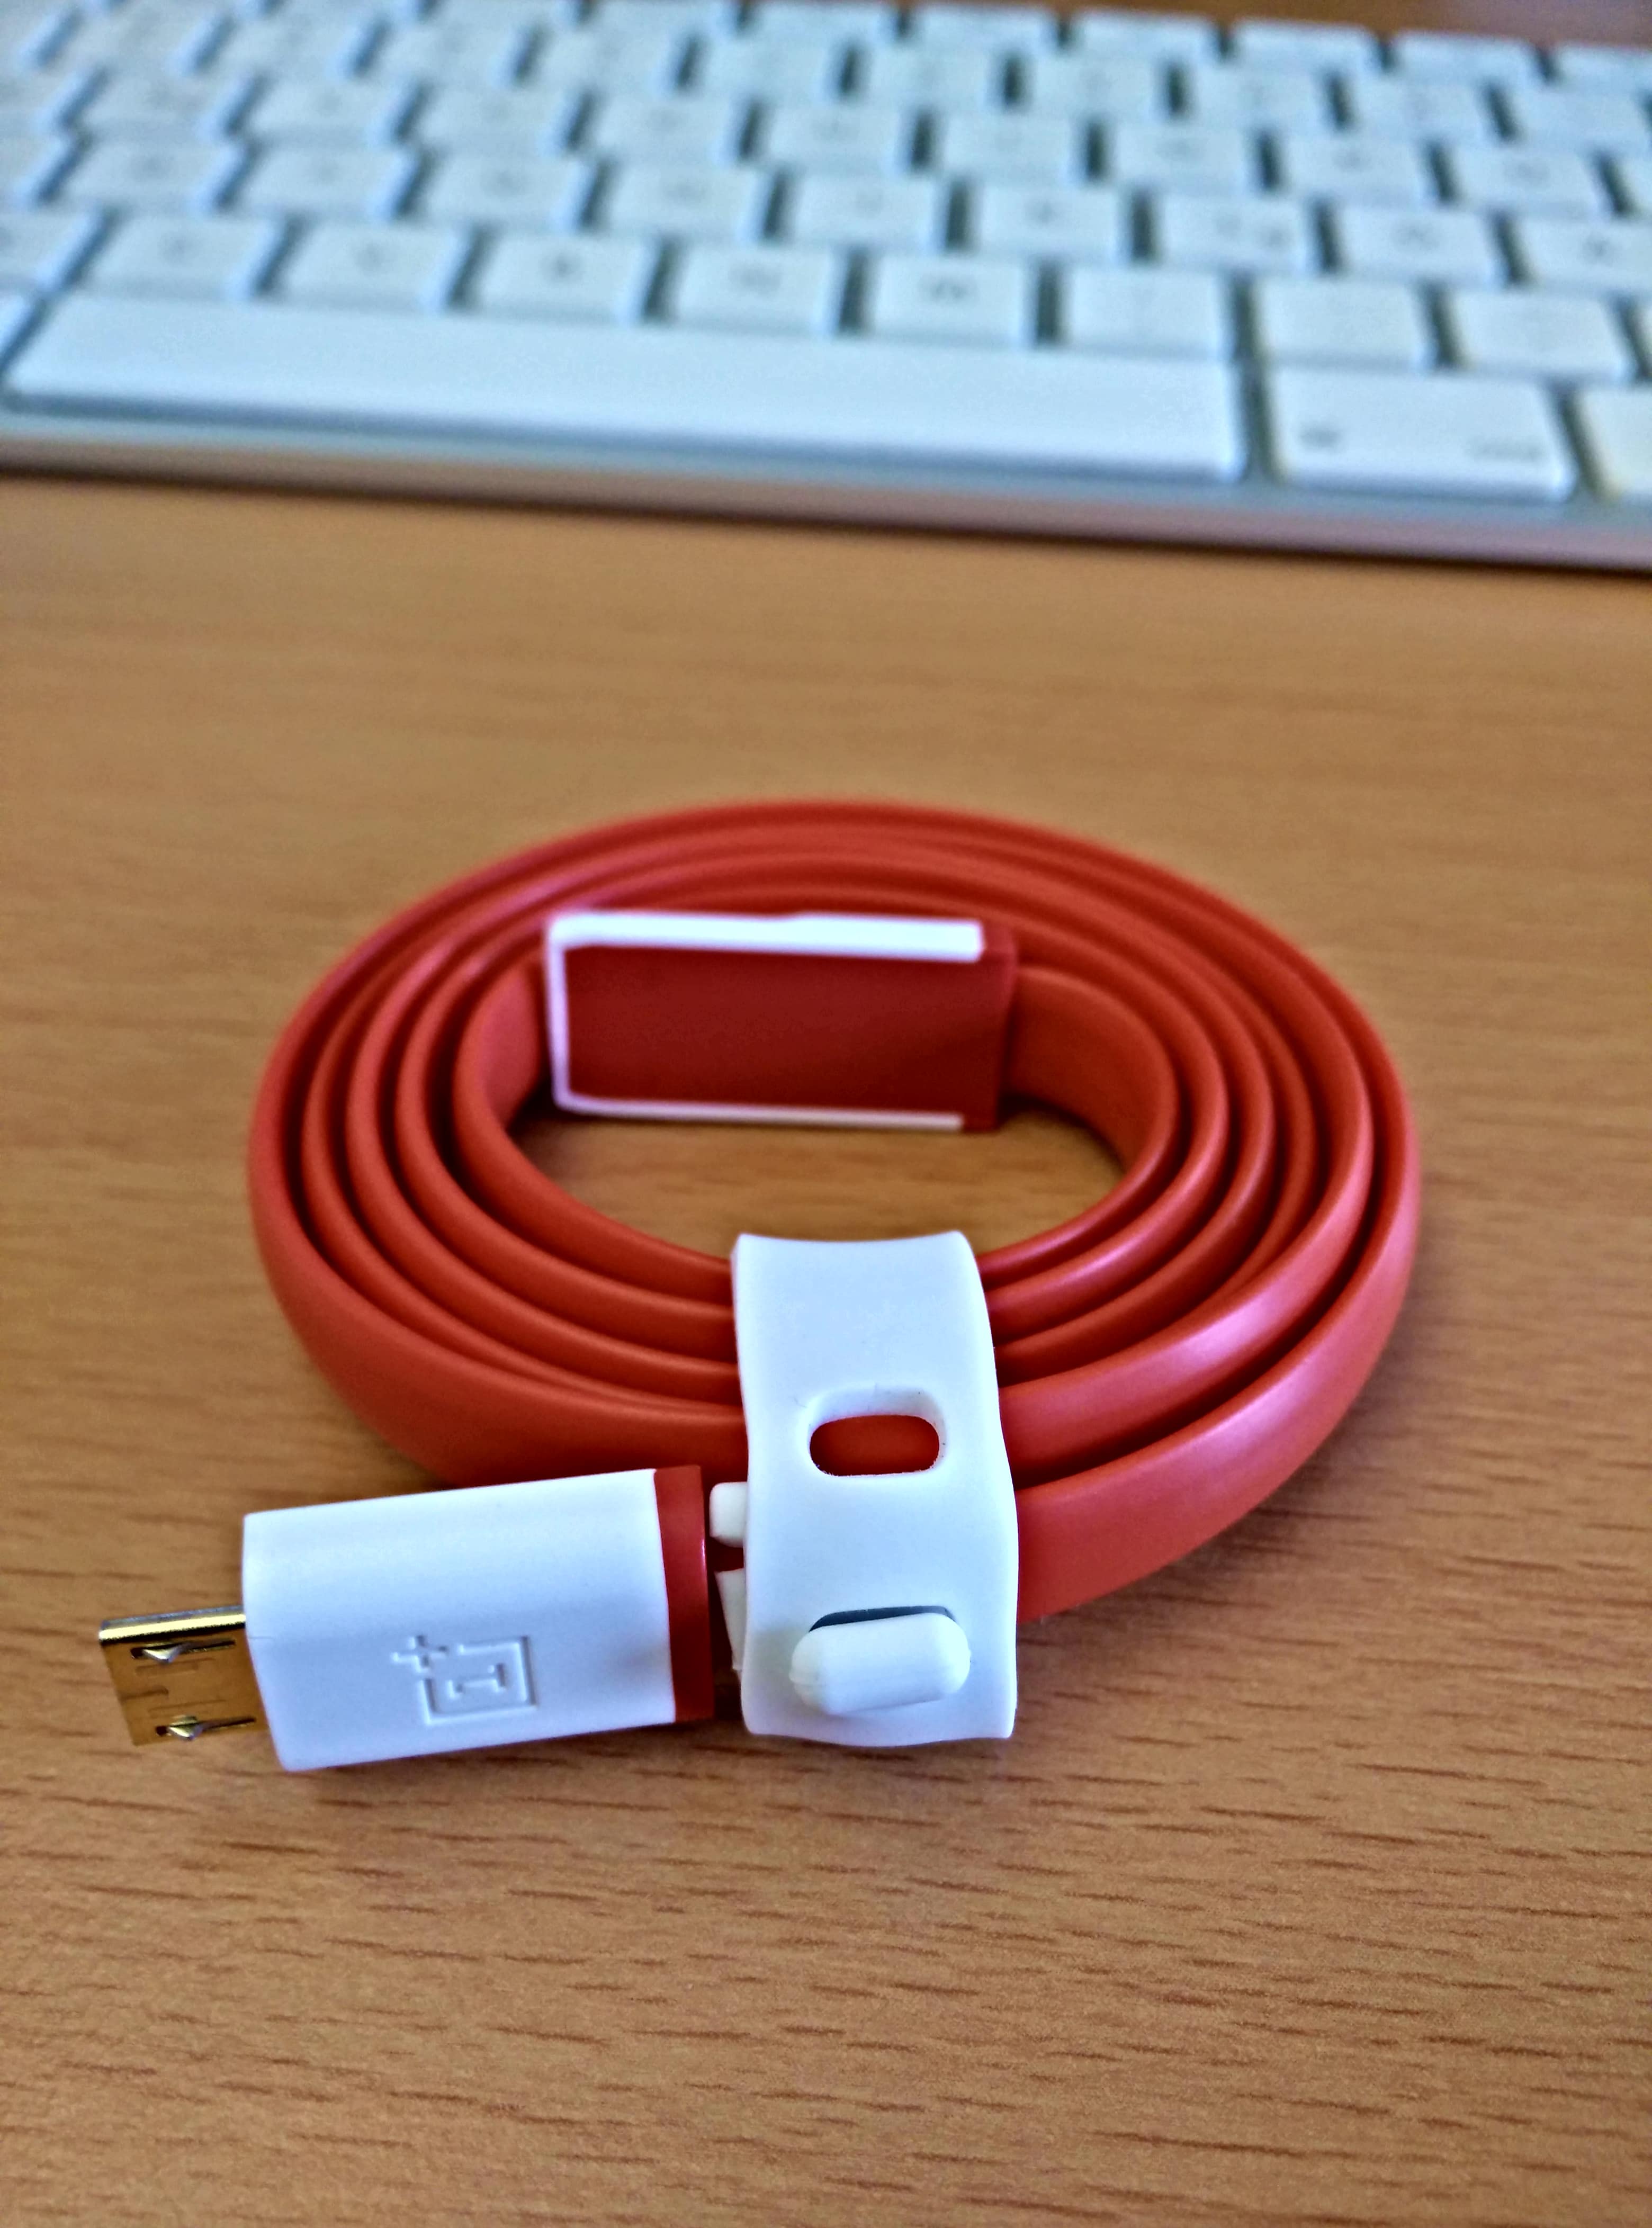 Picture of the OnePlus One Cable curled up on a desk